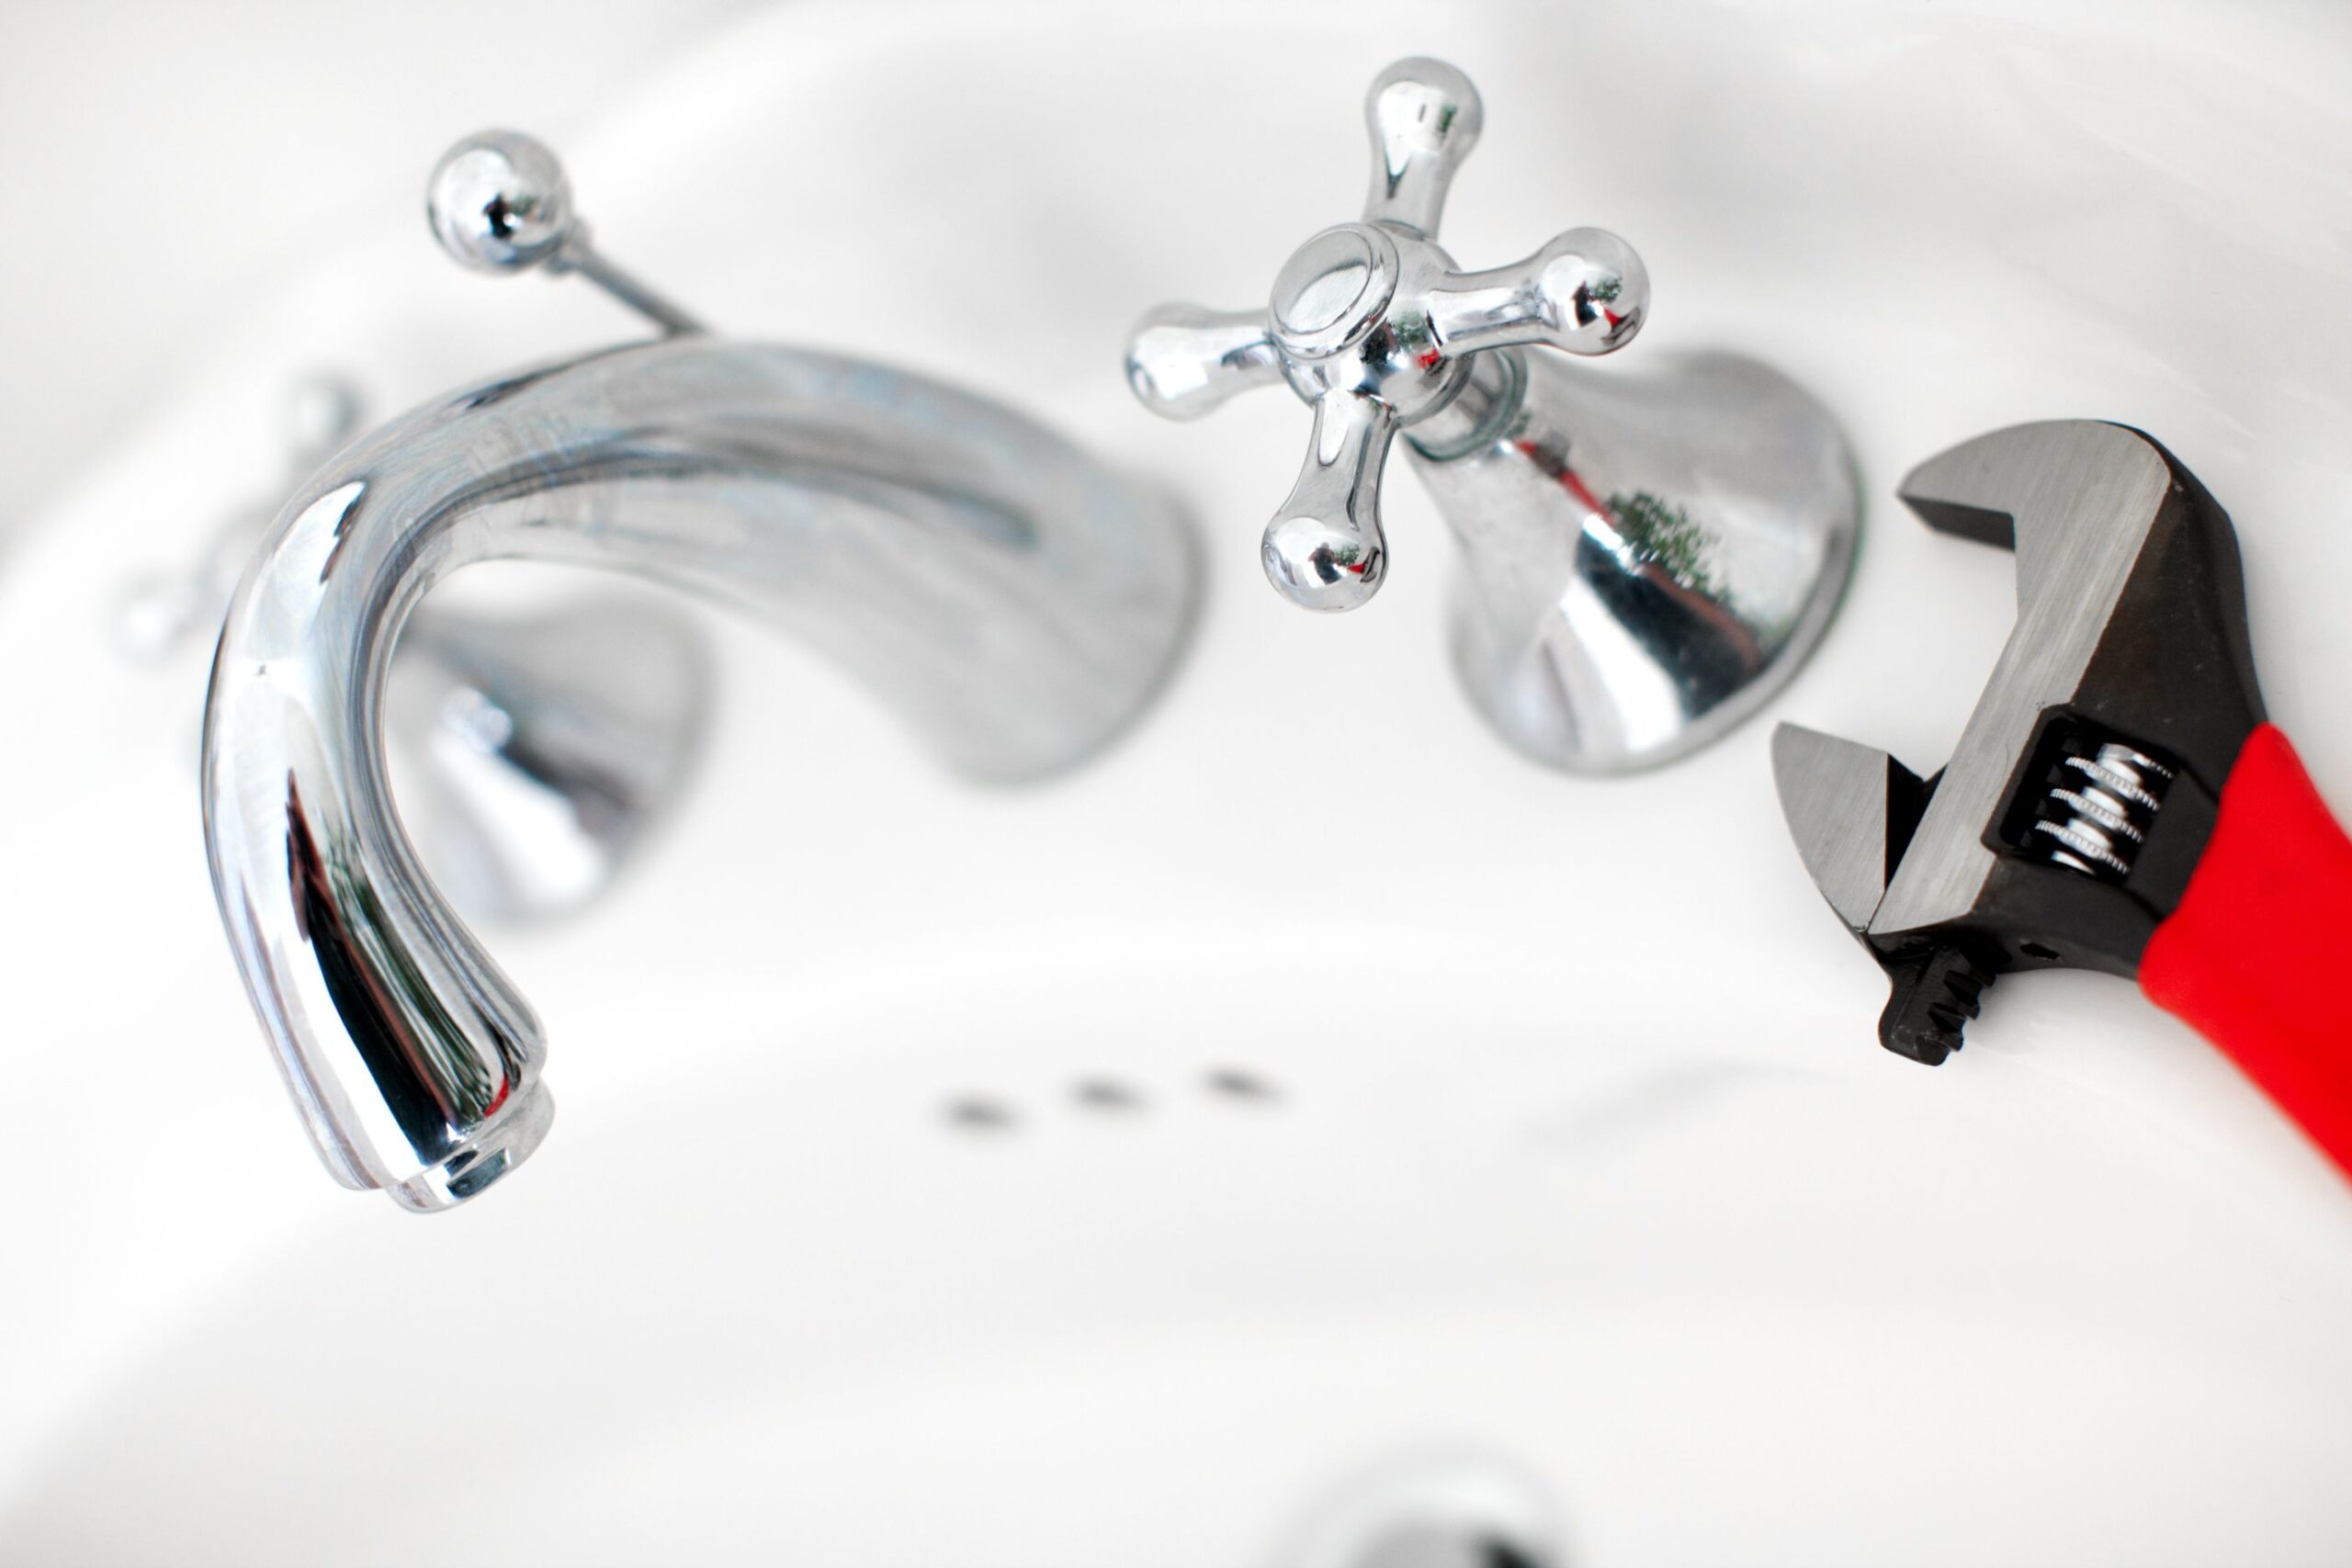 How to Install a Sink Faucet: A Step-by-Step Guide